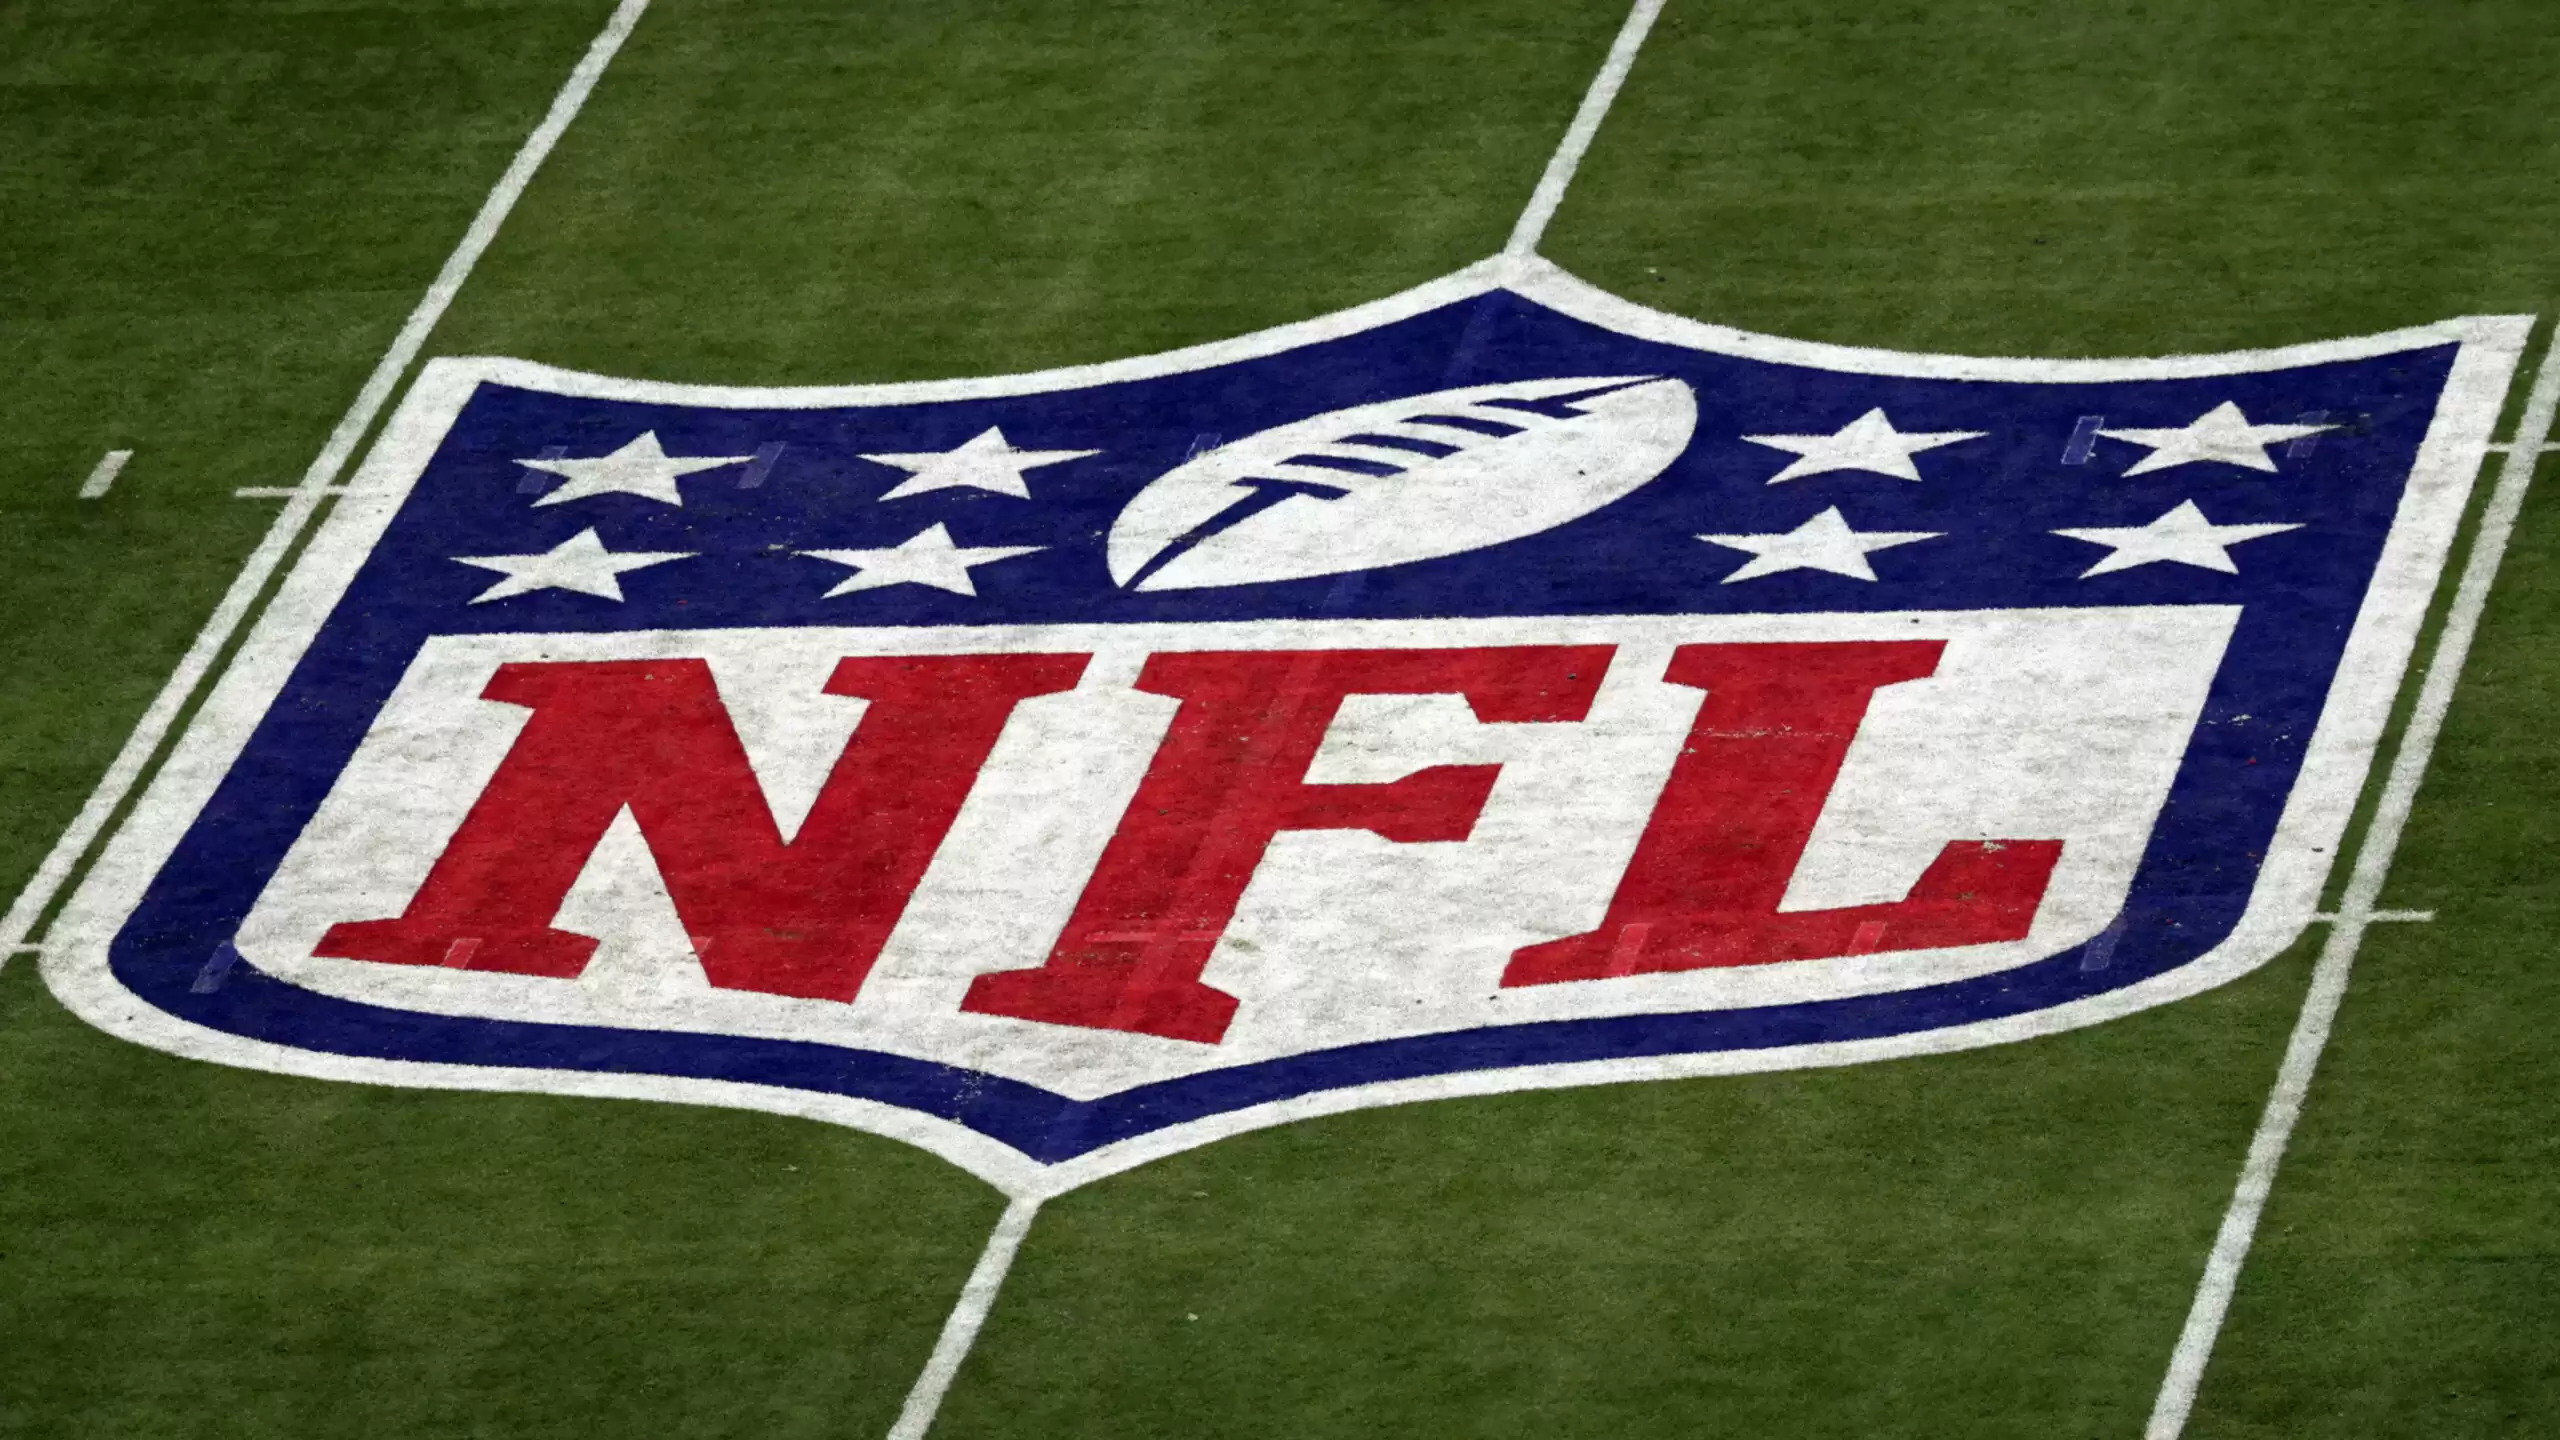 NFL Network, RedZone to launch exclusive 'NFL+' streaming service